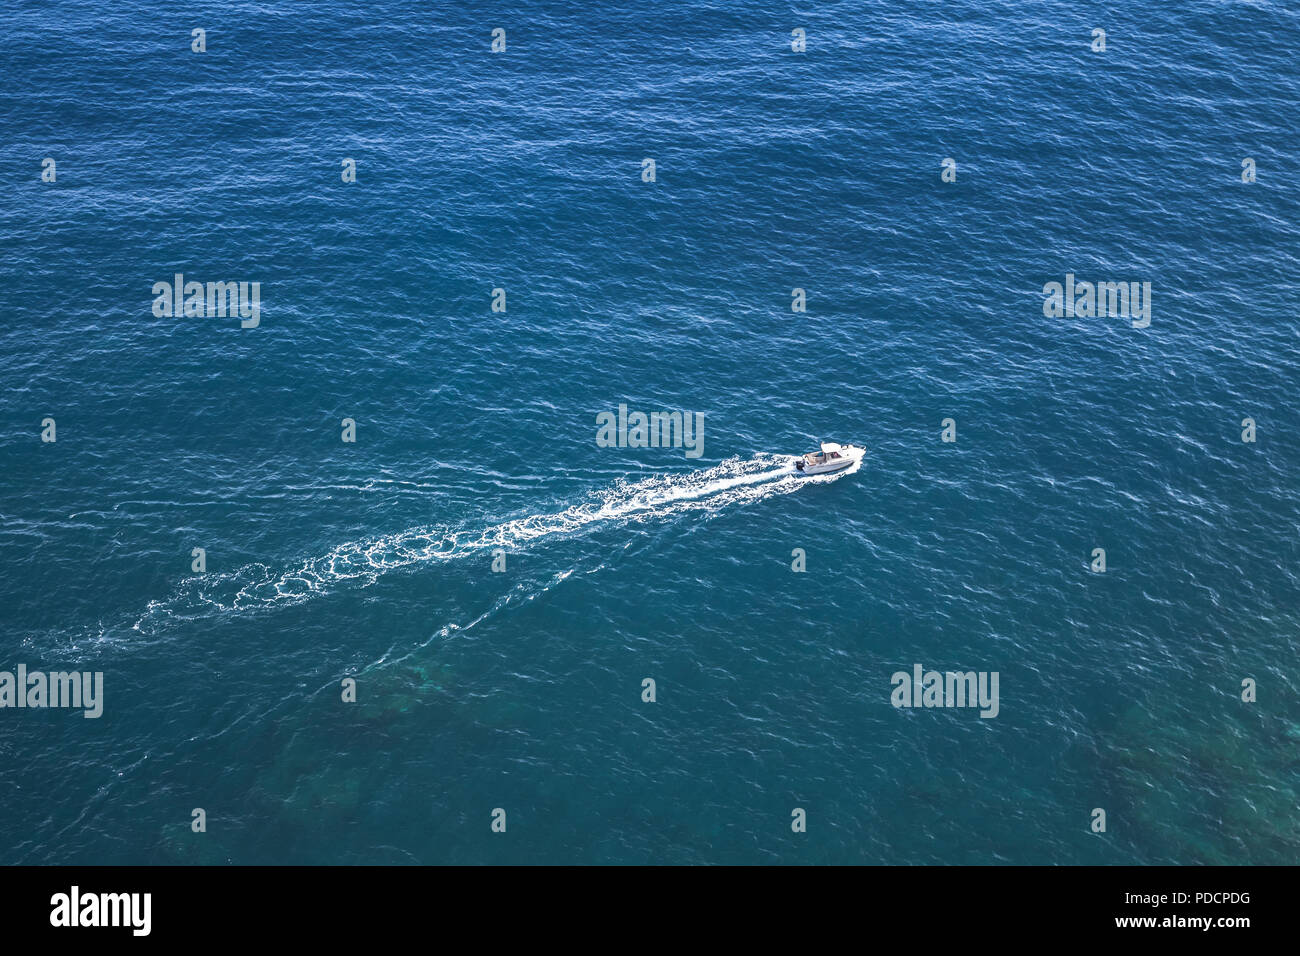 Fast motor boat goes on the ocean water, aerial photo Stock Photo